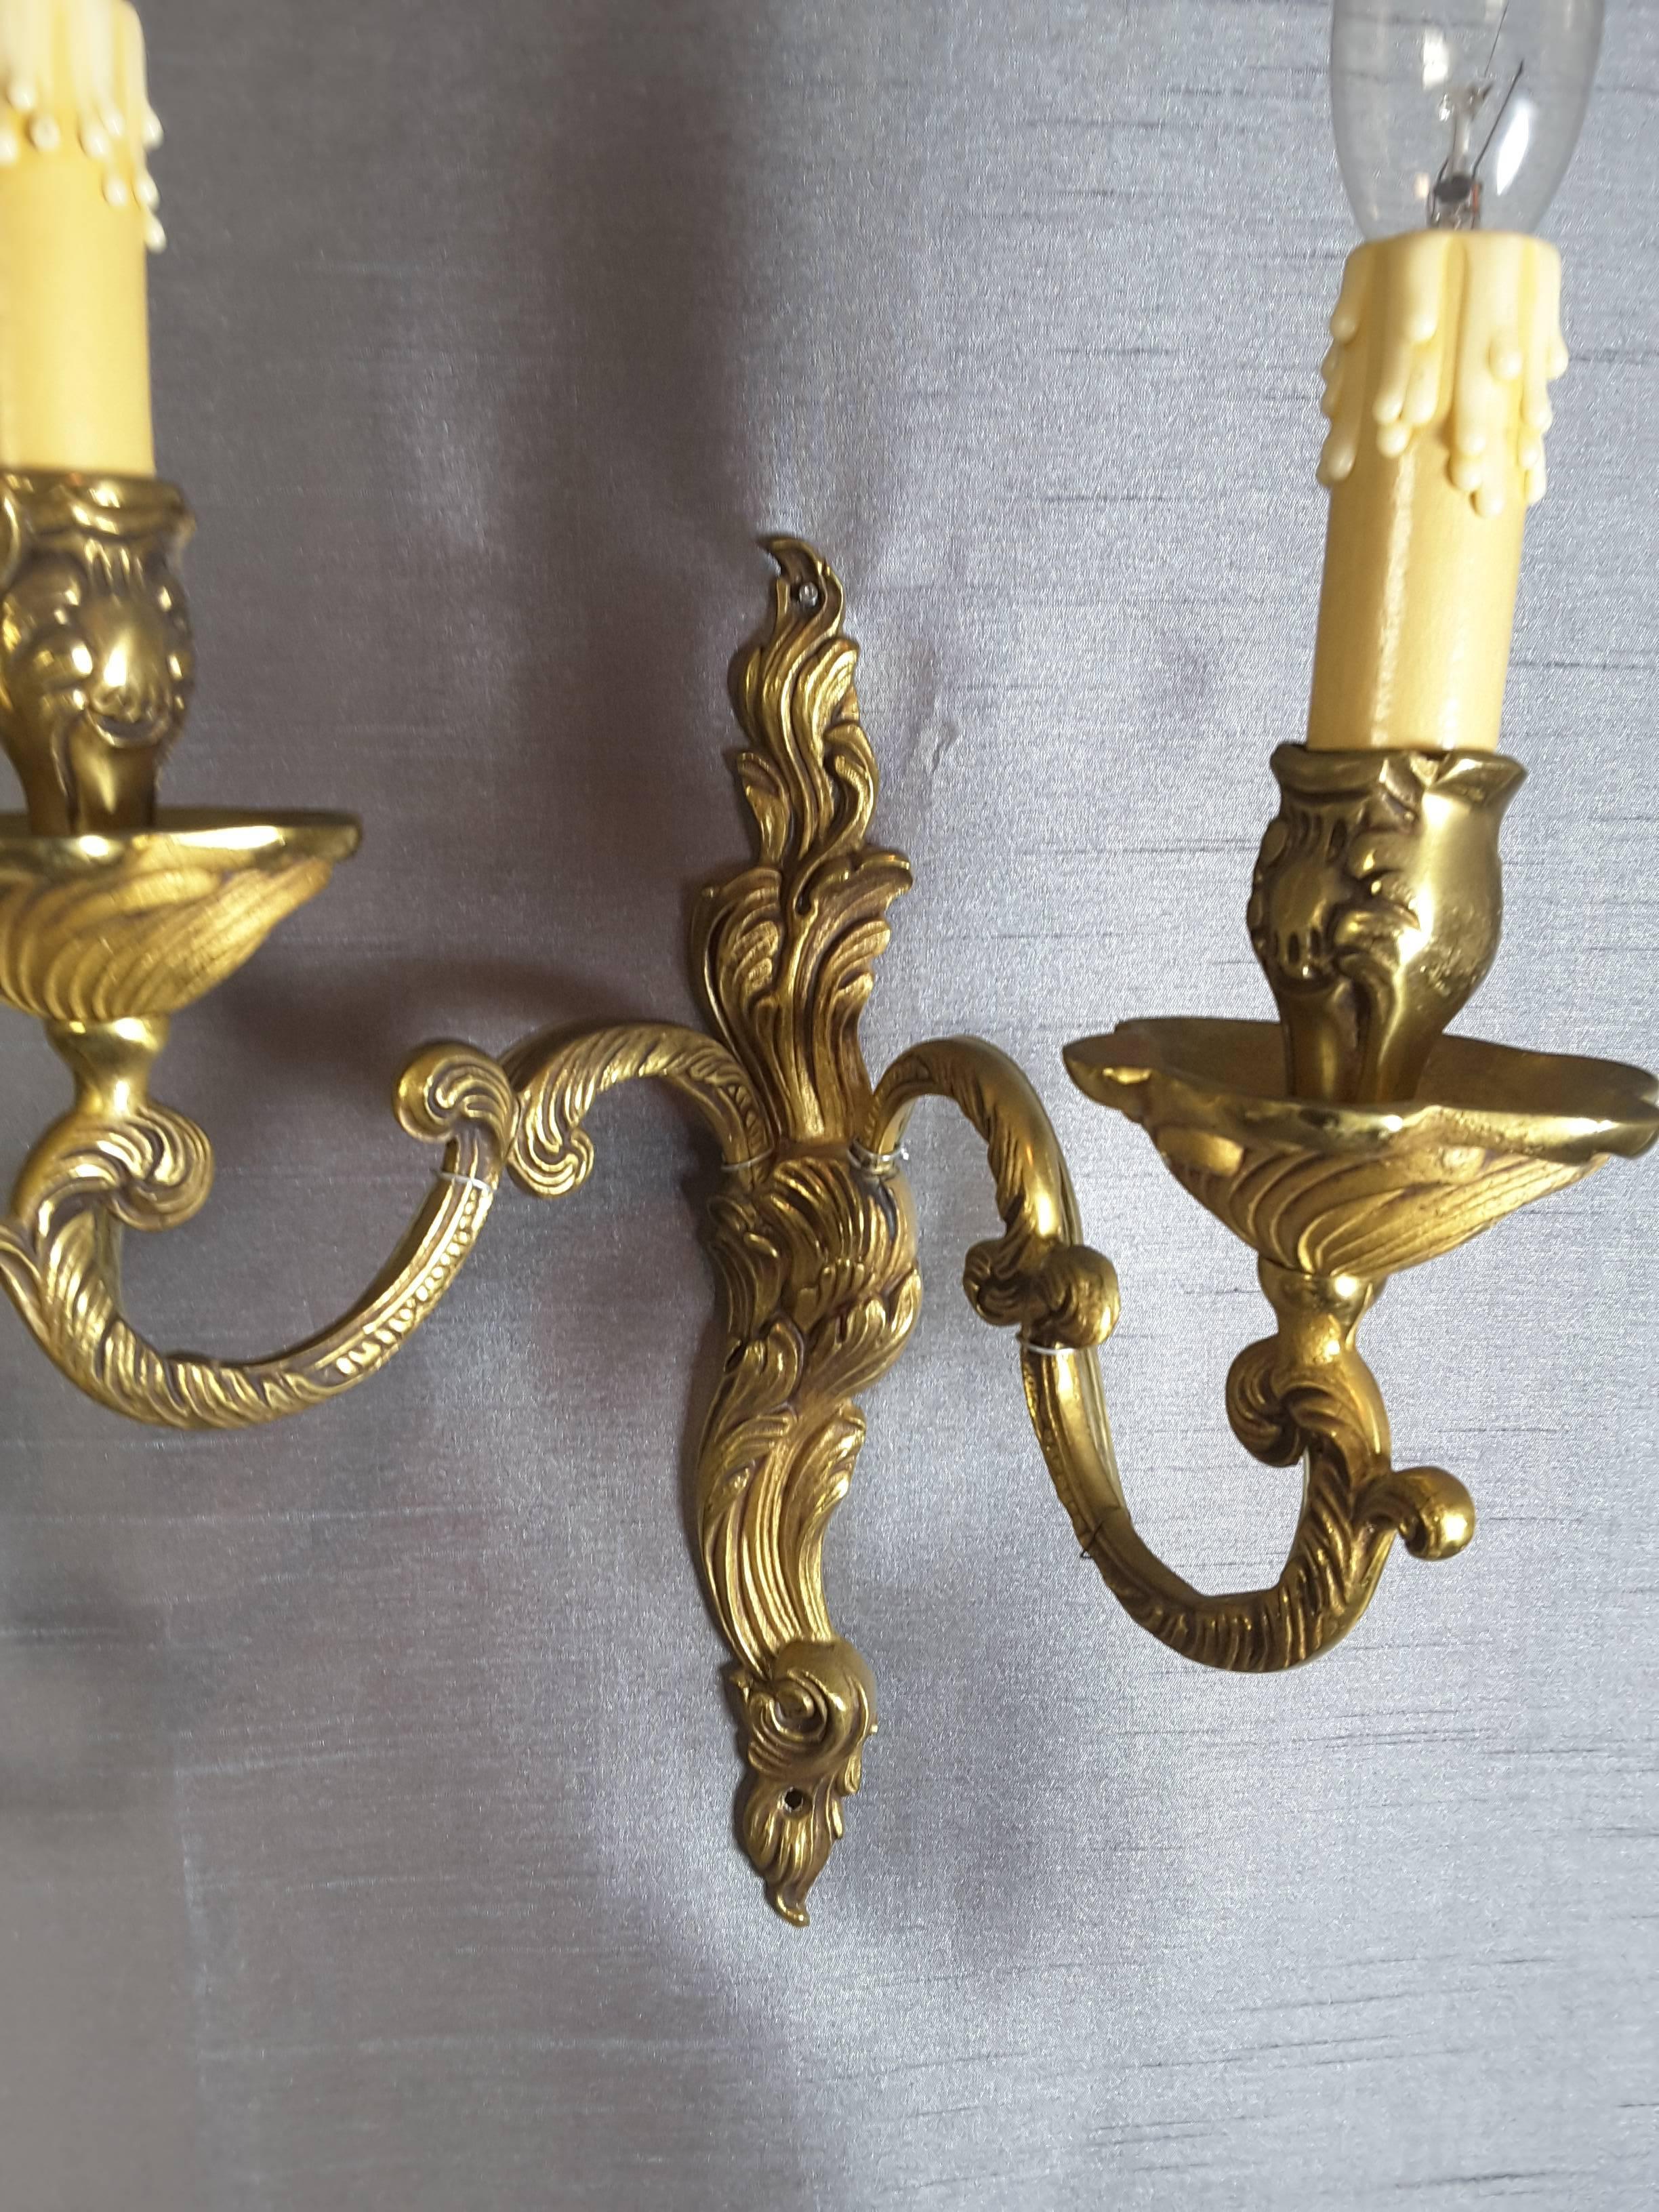 Pair of Large Brass Gilt Wall Sconces In Good Condition For Sale In Ottawa, Ontario